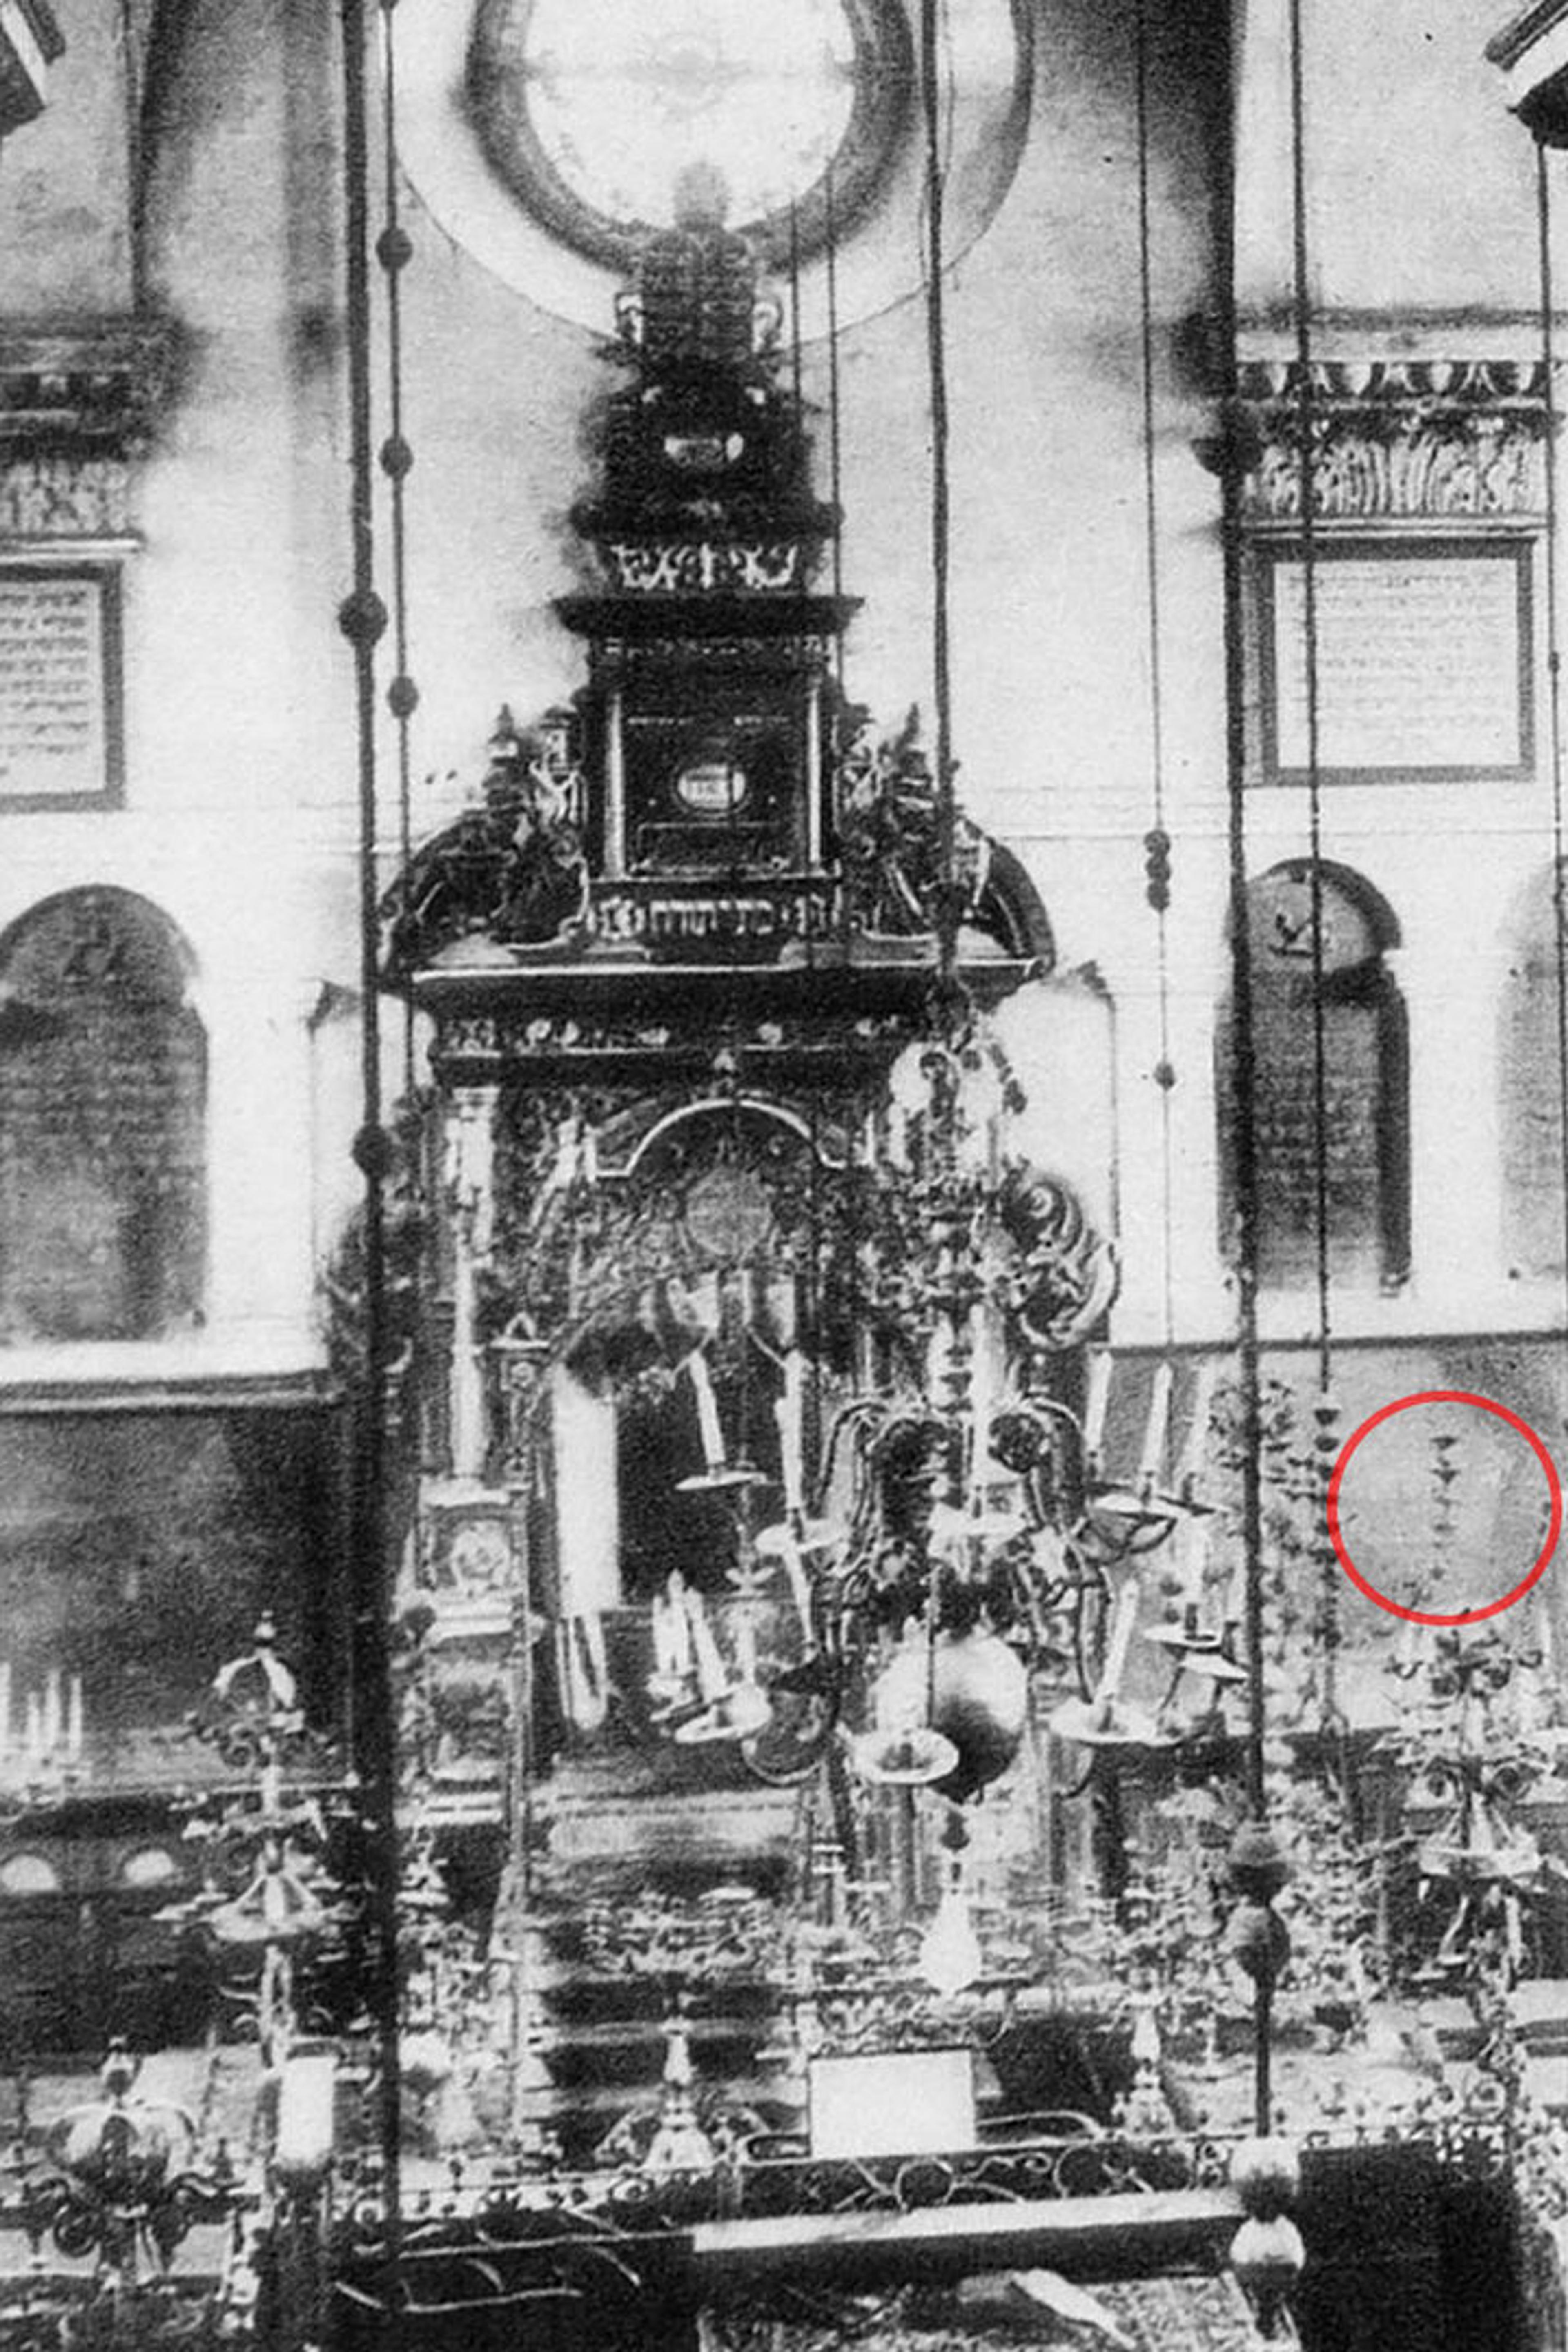 An old photo of a synagogue filled with artifacts